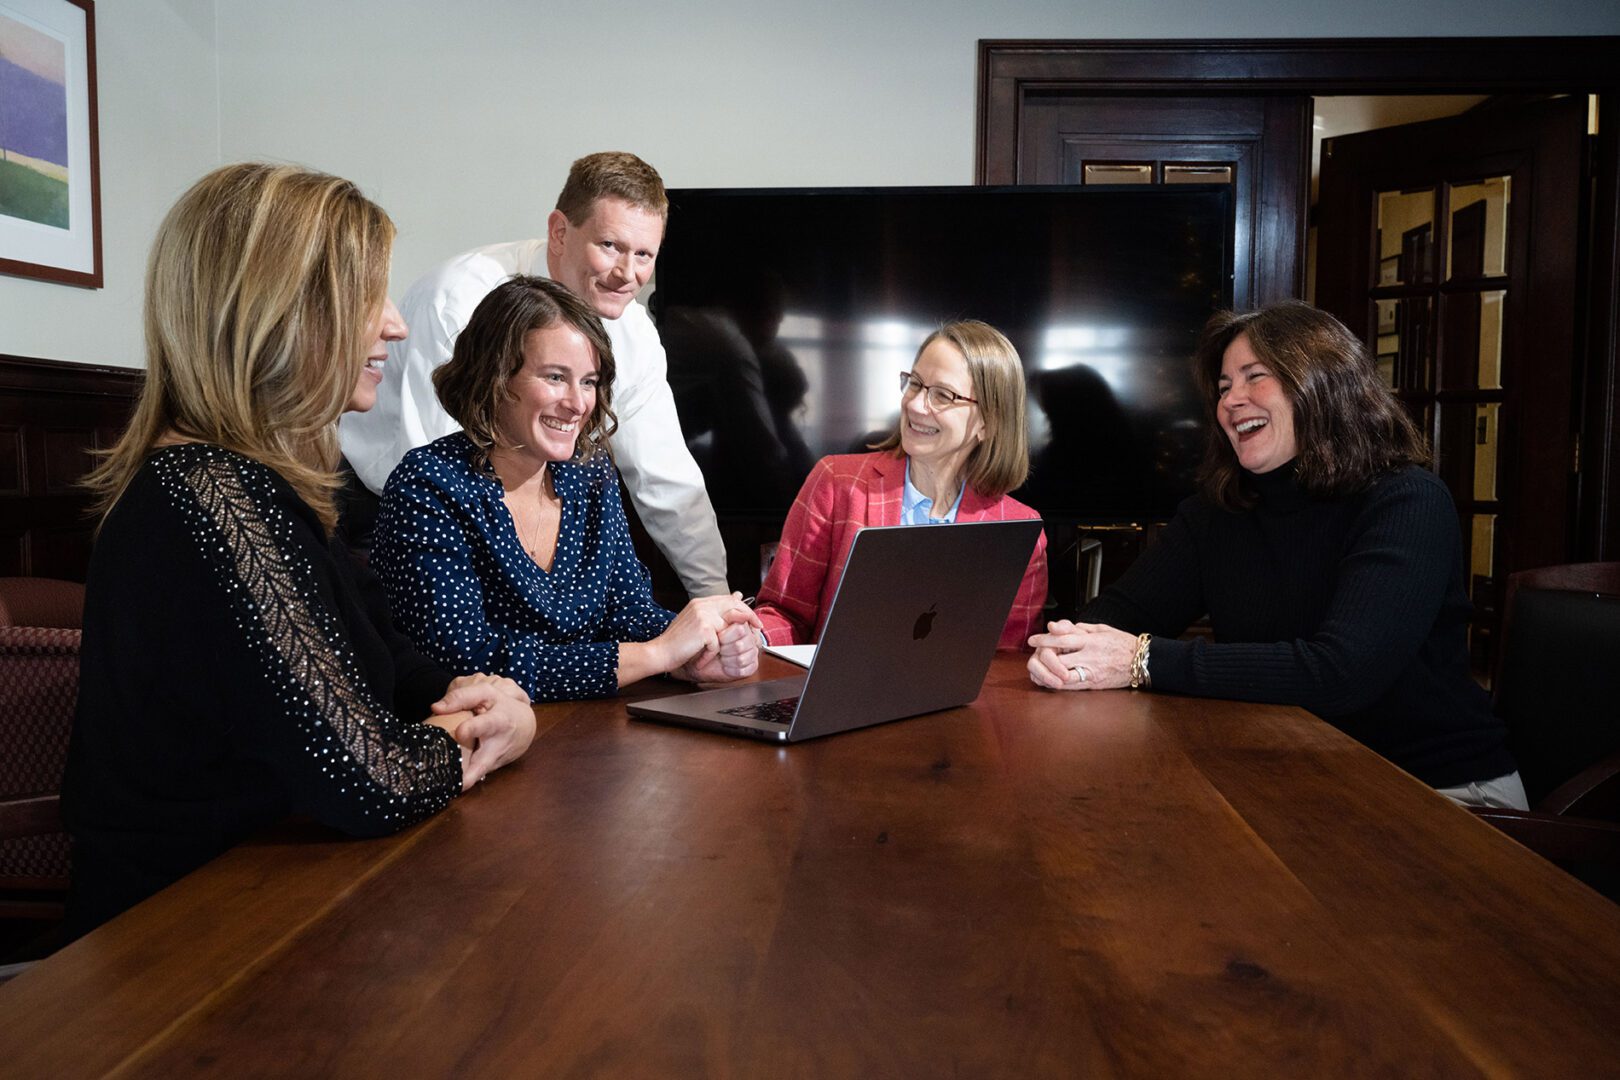 Five employees from the Brattleboro office sharing a laugh around a computer